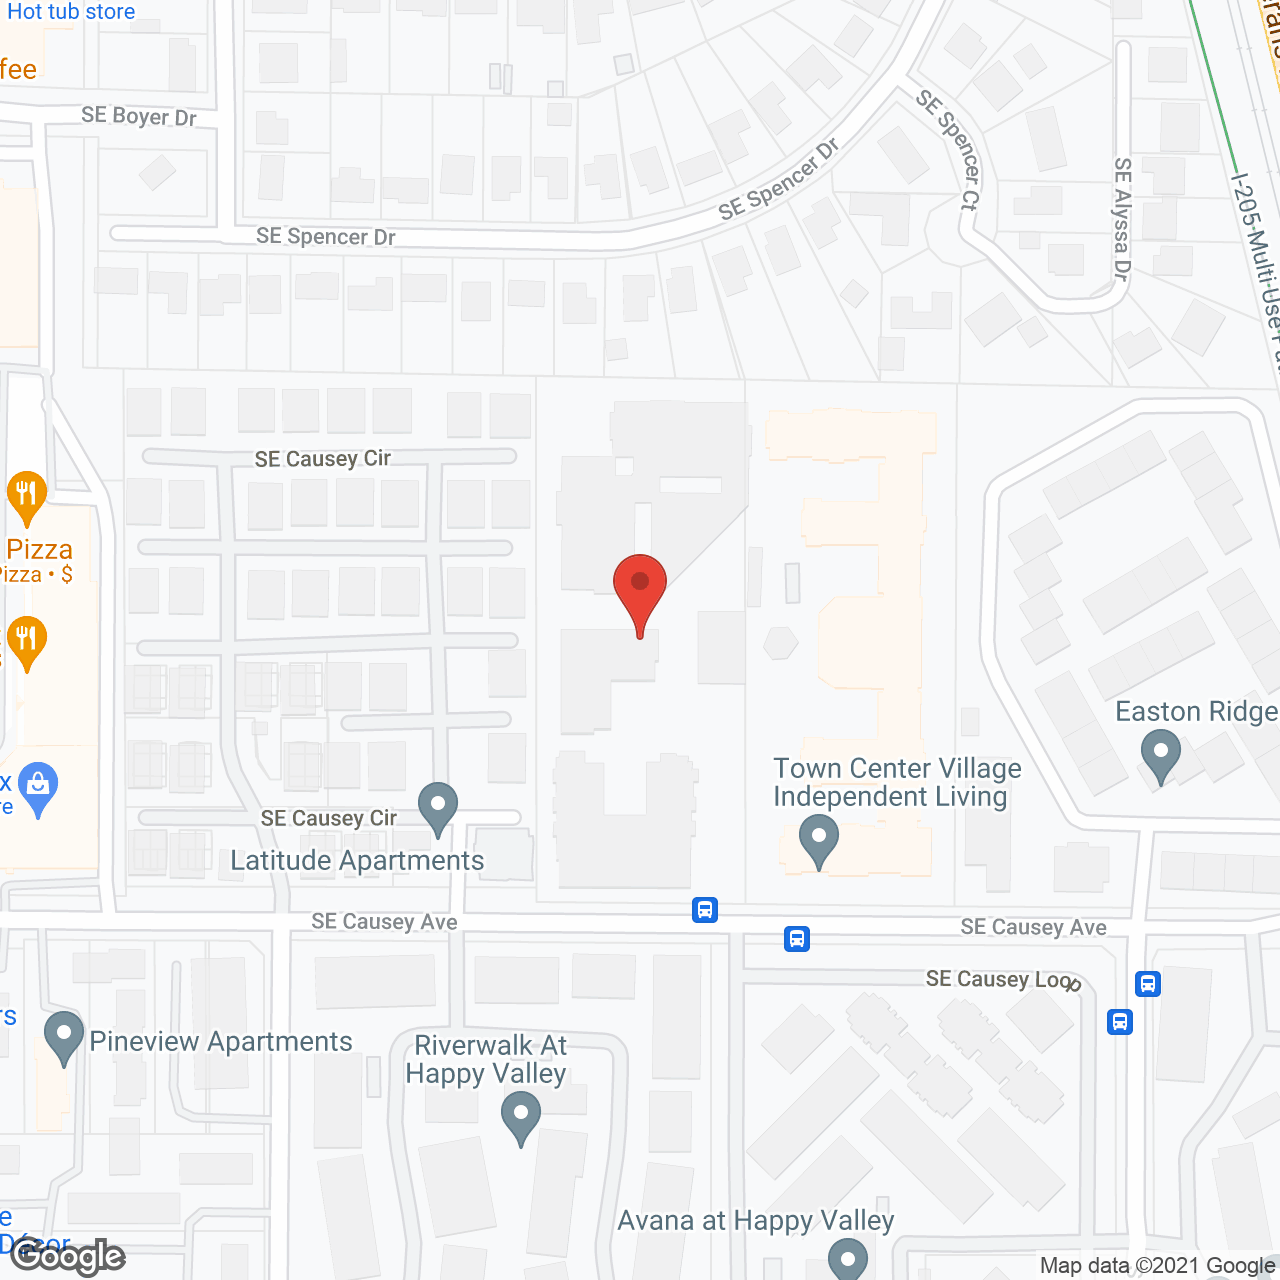 The Fountains At Town Center Village in google map